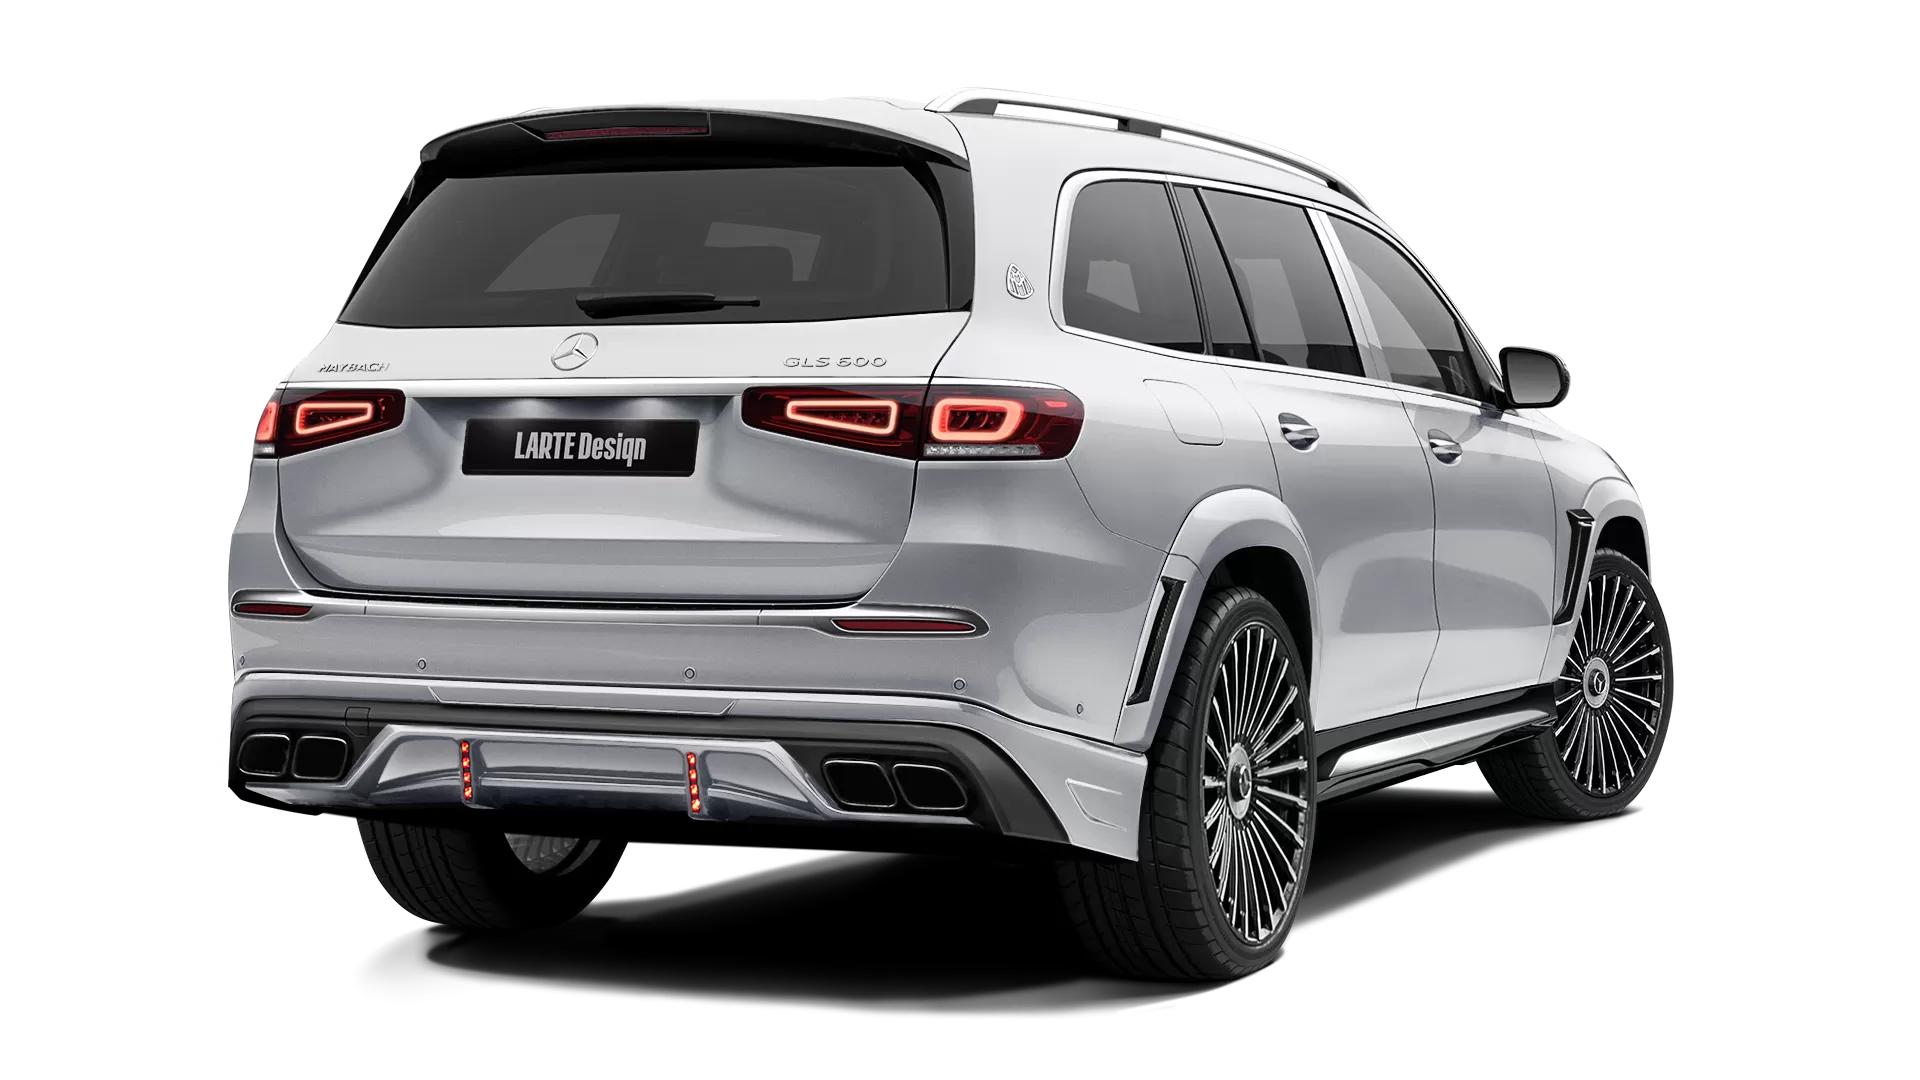 Mercedes Maybach GLS 600 with painted body kit: rear view shown in High Tech Silver